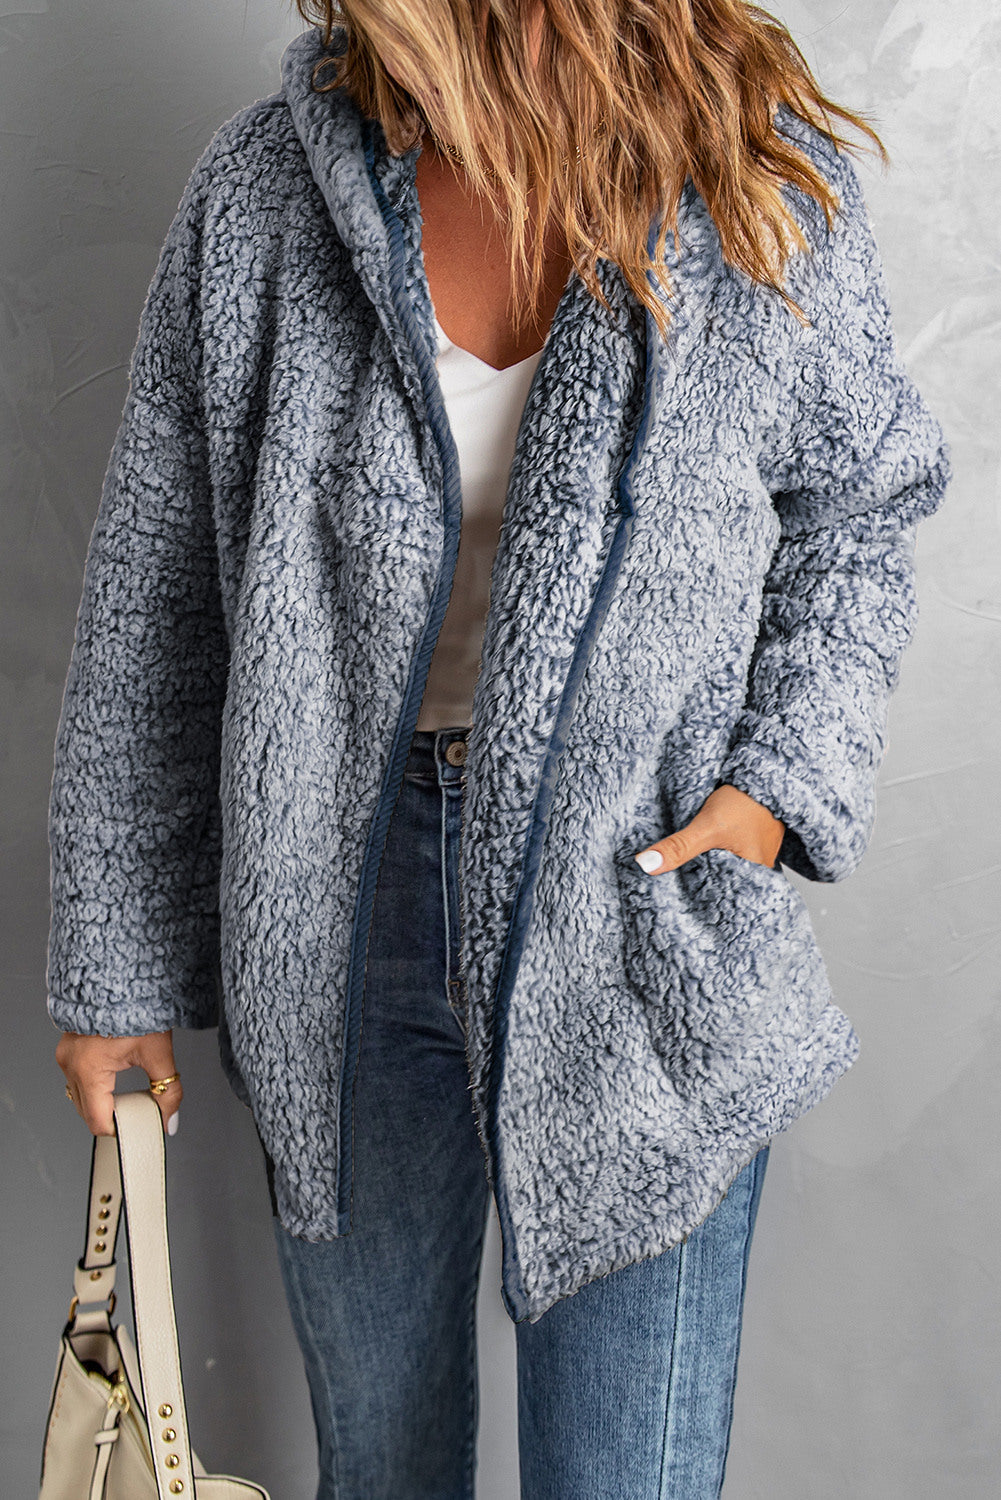 LC85279-5-S, LC85279-5-M, LC85279-5-L, LC85279-5-XL, LC85279-5-2XL, Blue Women's Autumn Winter Faux Shearling Pullover Jacket Coat